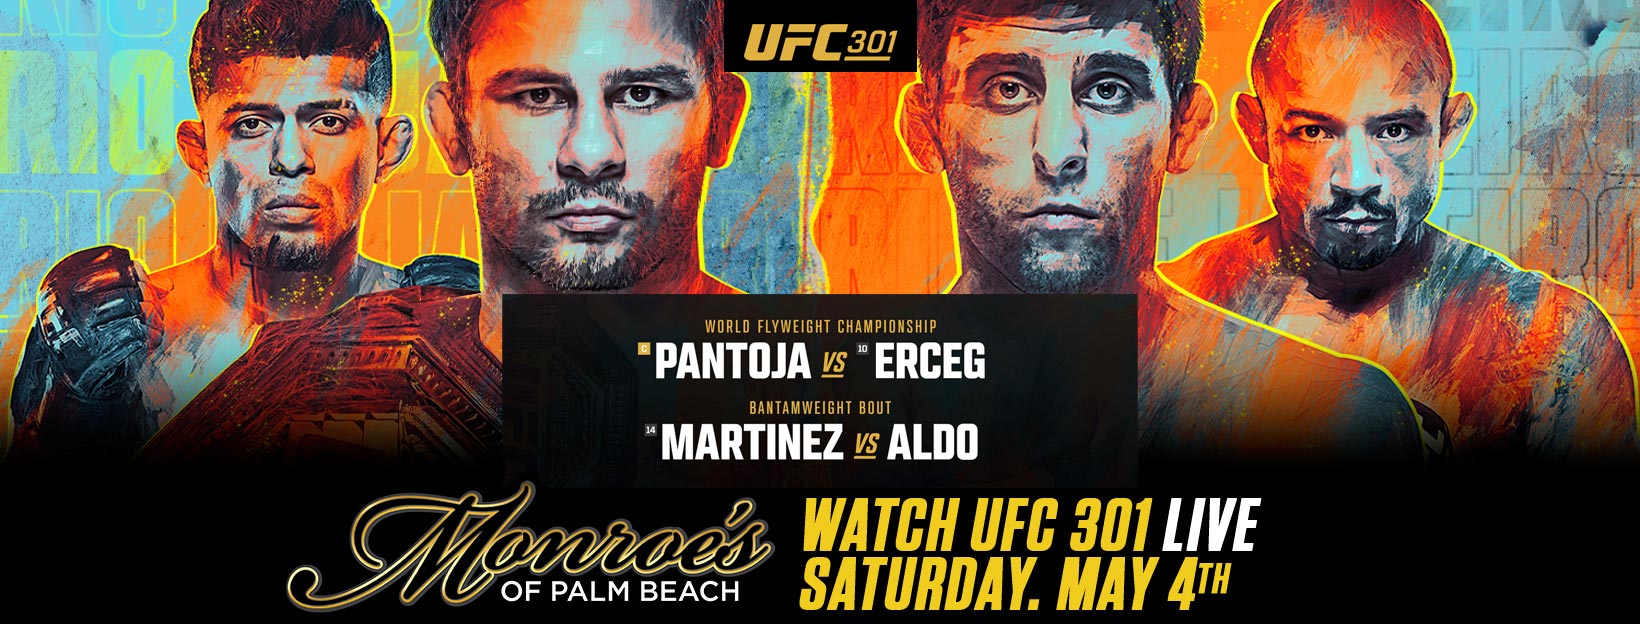 UFC 301 Live Watch Party at Monroe's Palm Beach May 4th